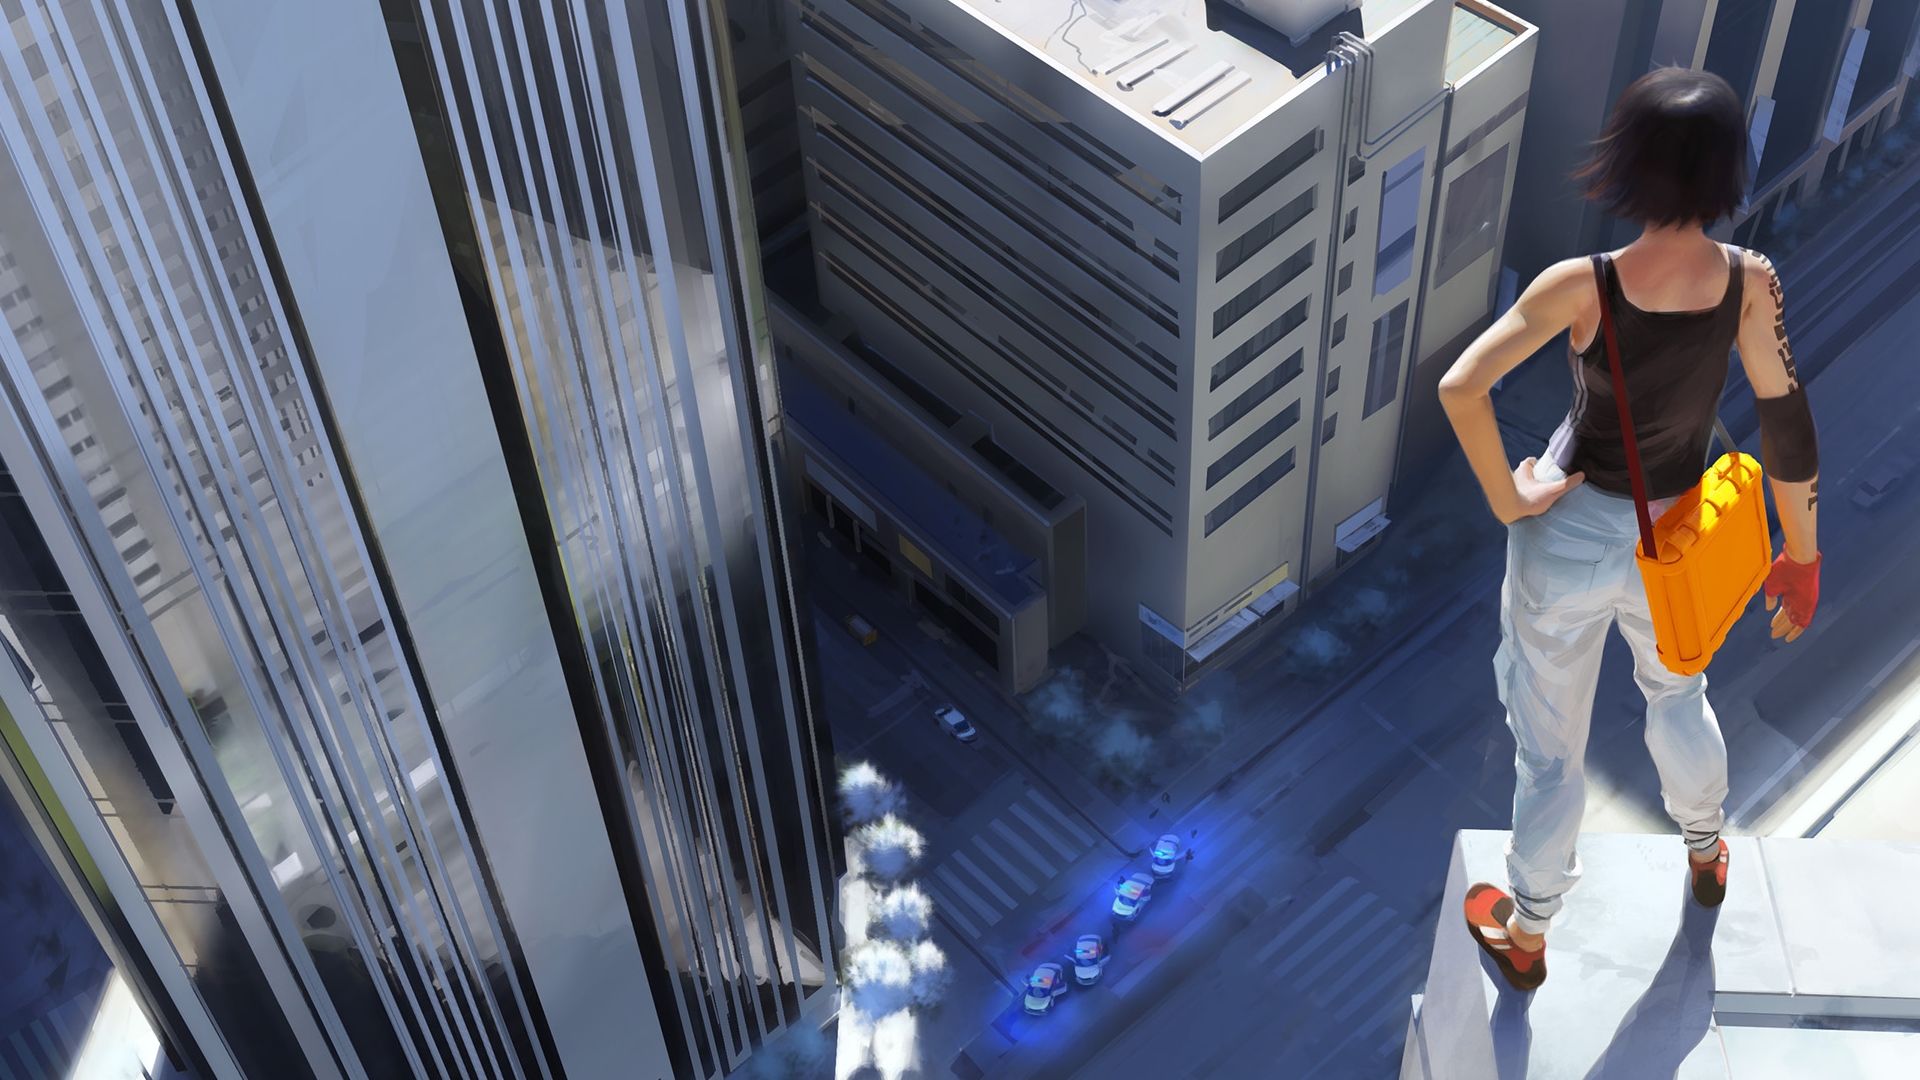 Mirror's Edge Images - LaunchBox Games Database